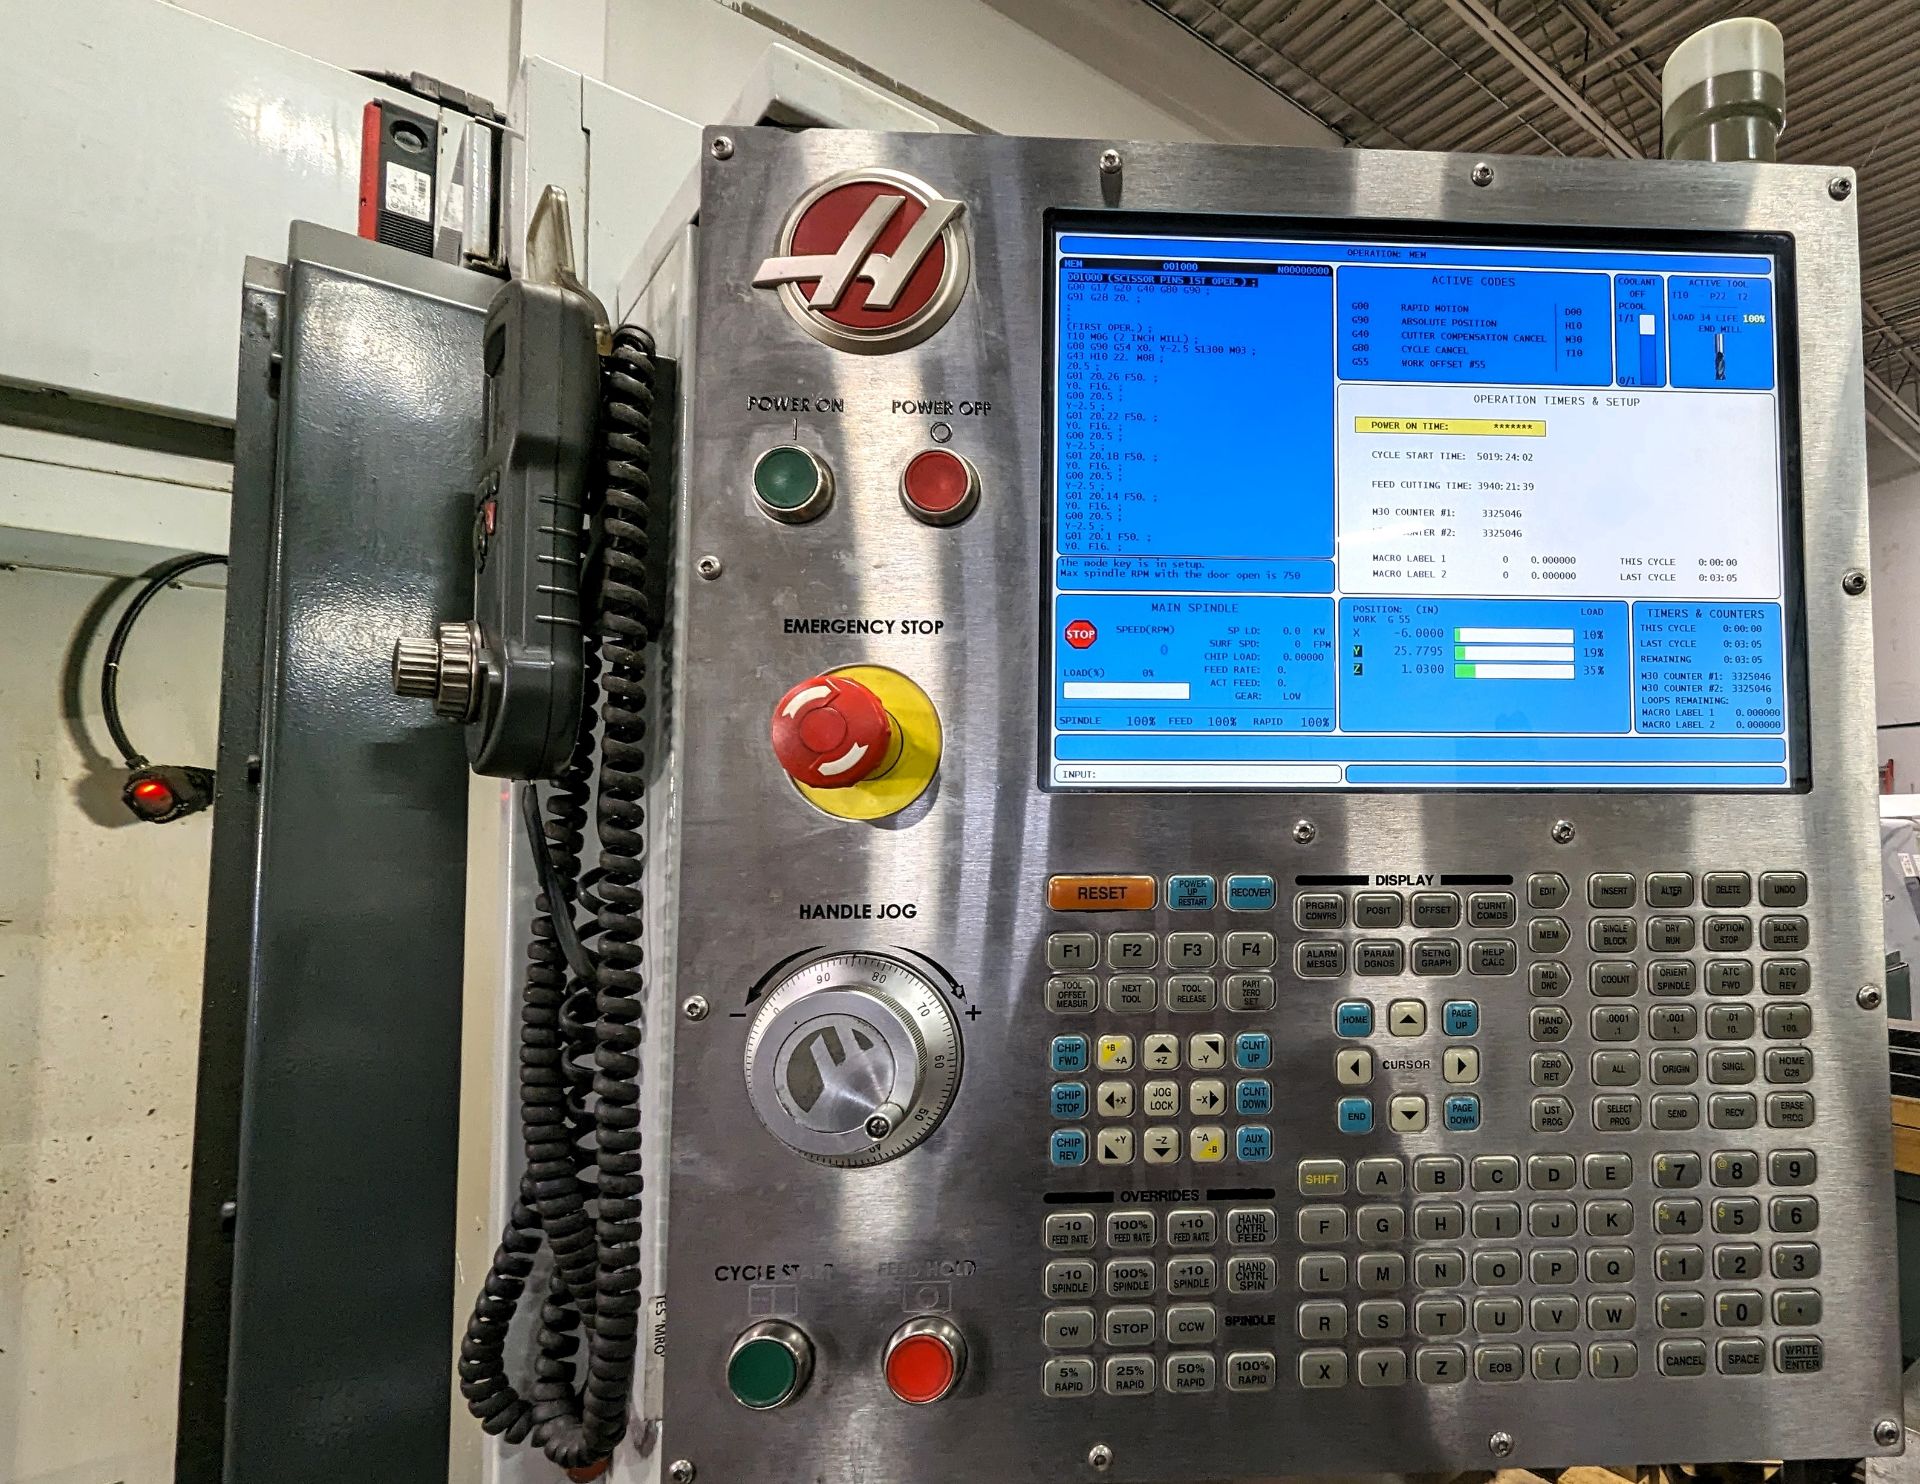 2012 HAAS VF6/40 CNC VERTICAL MACHINING CENTER, CNC CONTROL, 24” X 60” TABLE, 40 TAPER, 10,000 RPM - Image 3 of 17